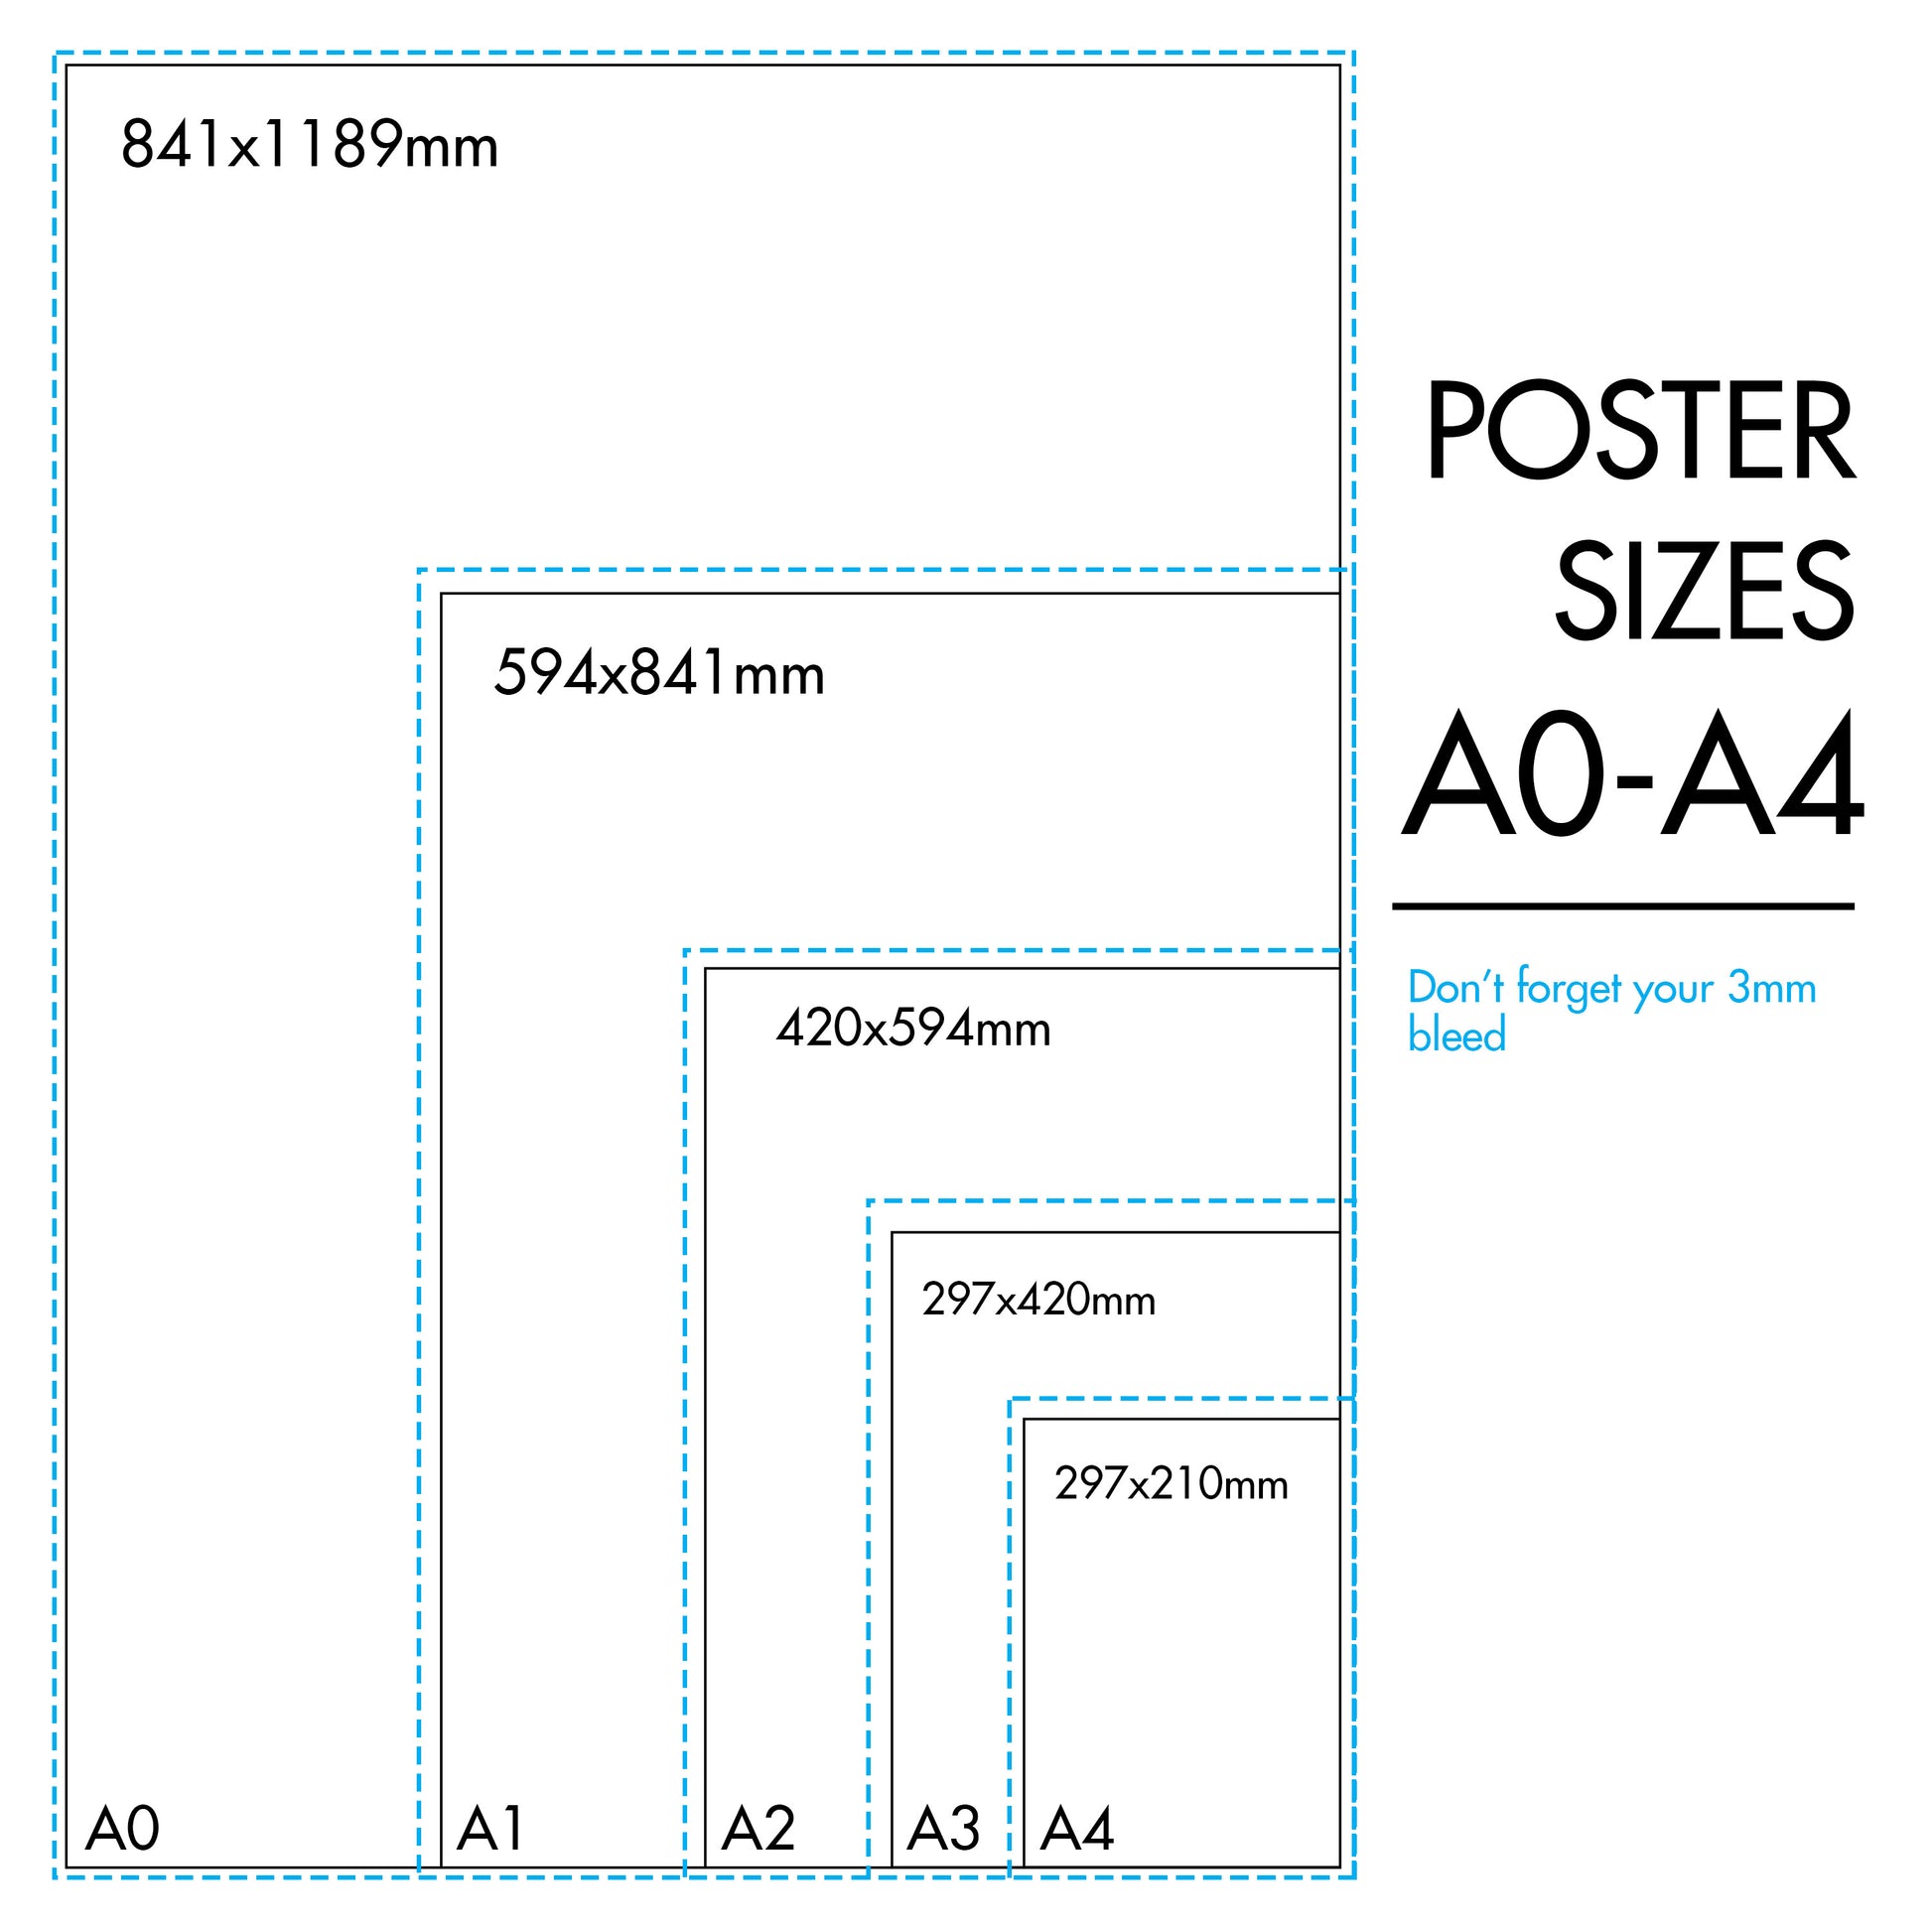 a0 poster size in cm